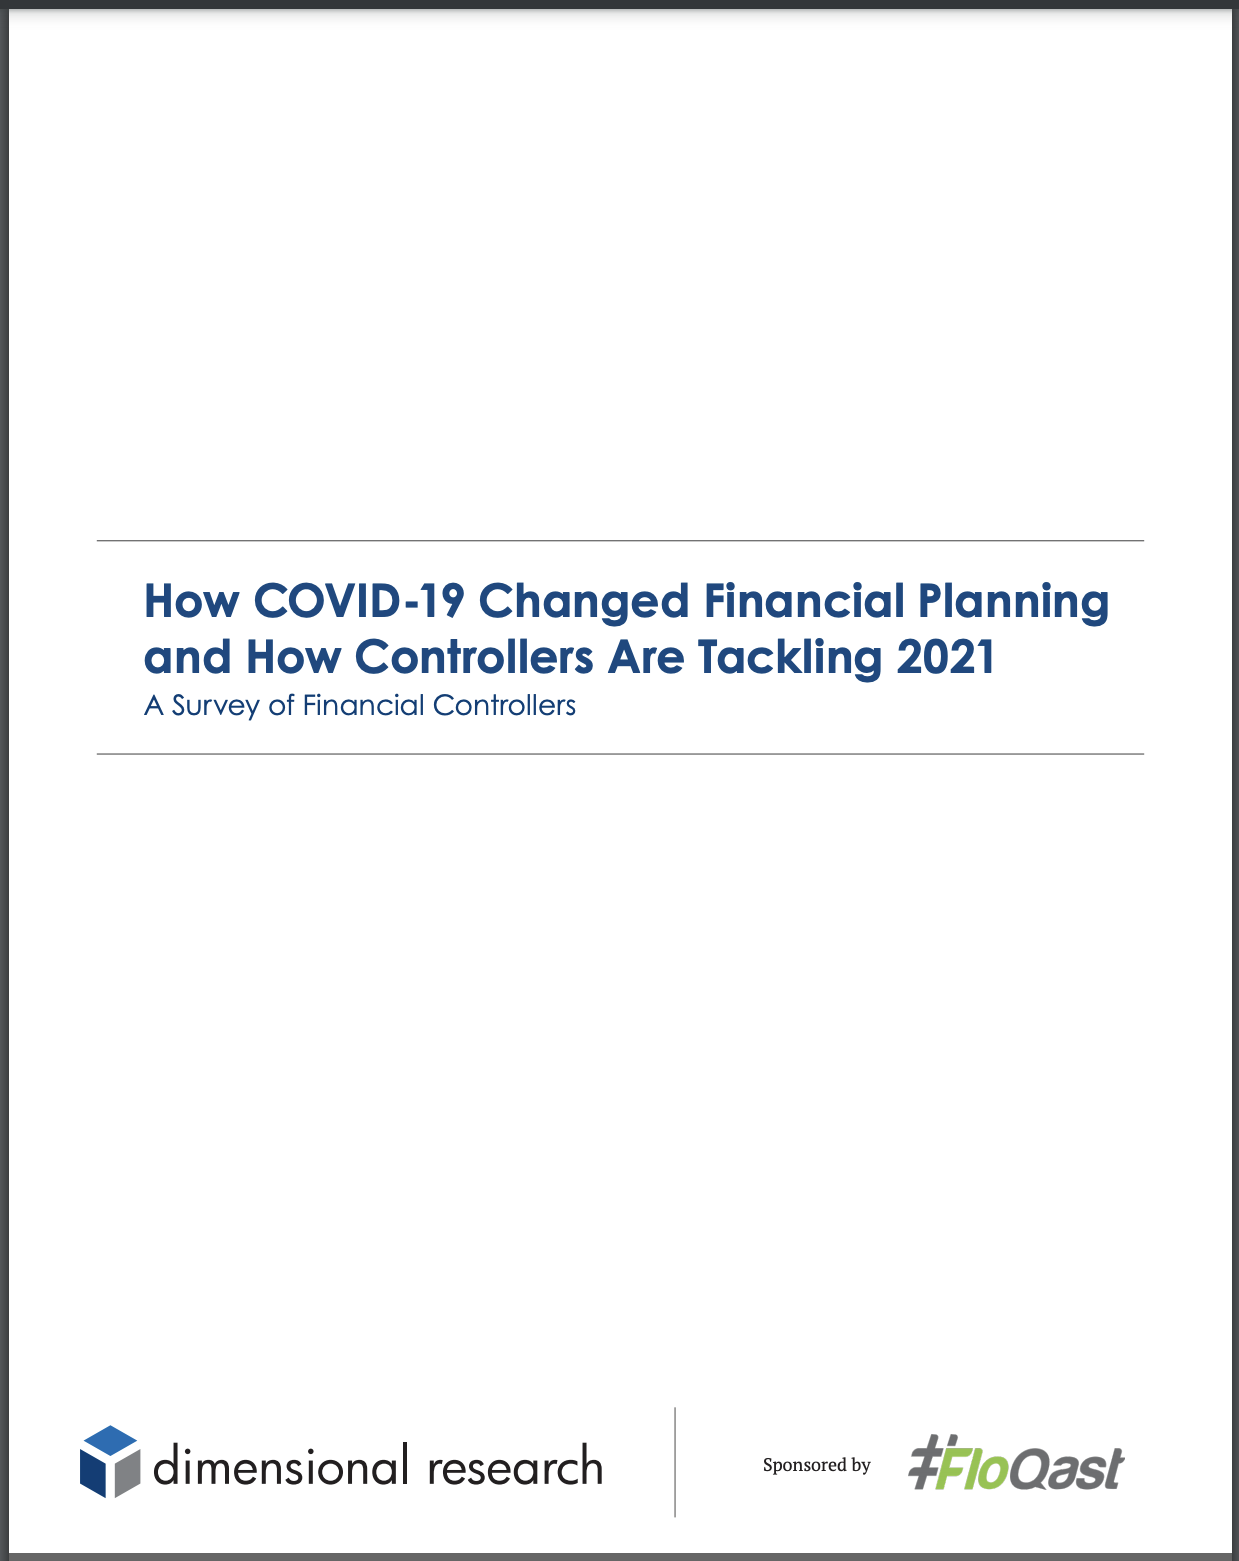 How COVID-19 Impacts Plannings